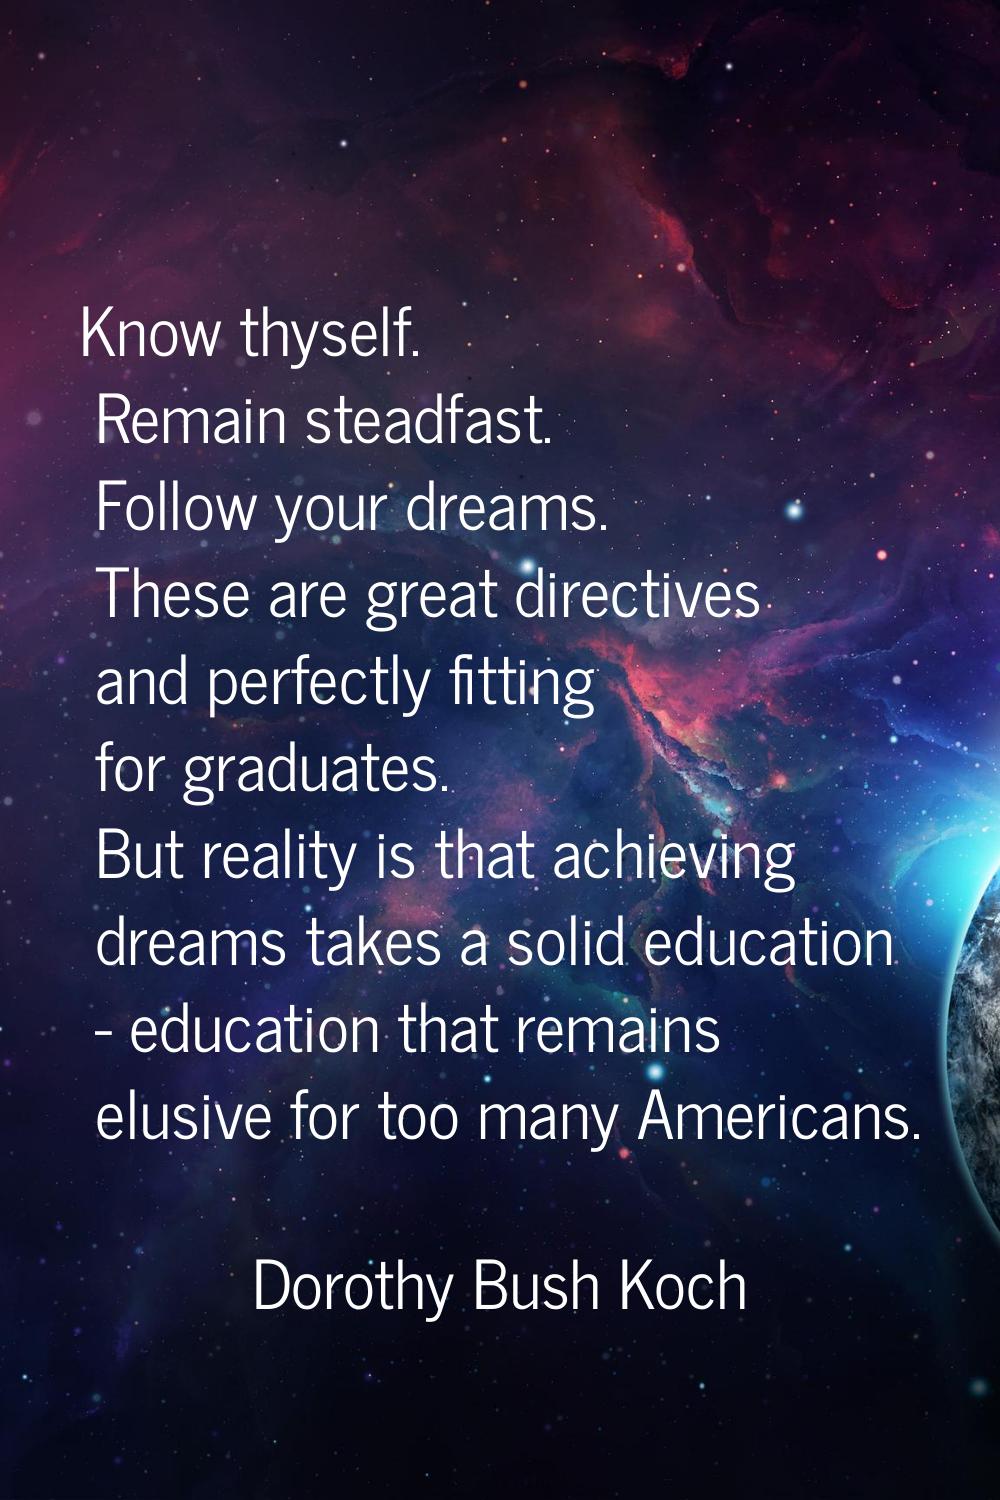 Know thyself. Remain steadfast. Follow your dreams. These are great directives and perfectly fittin